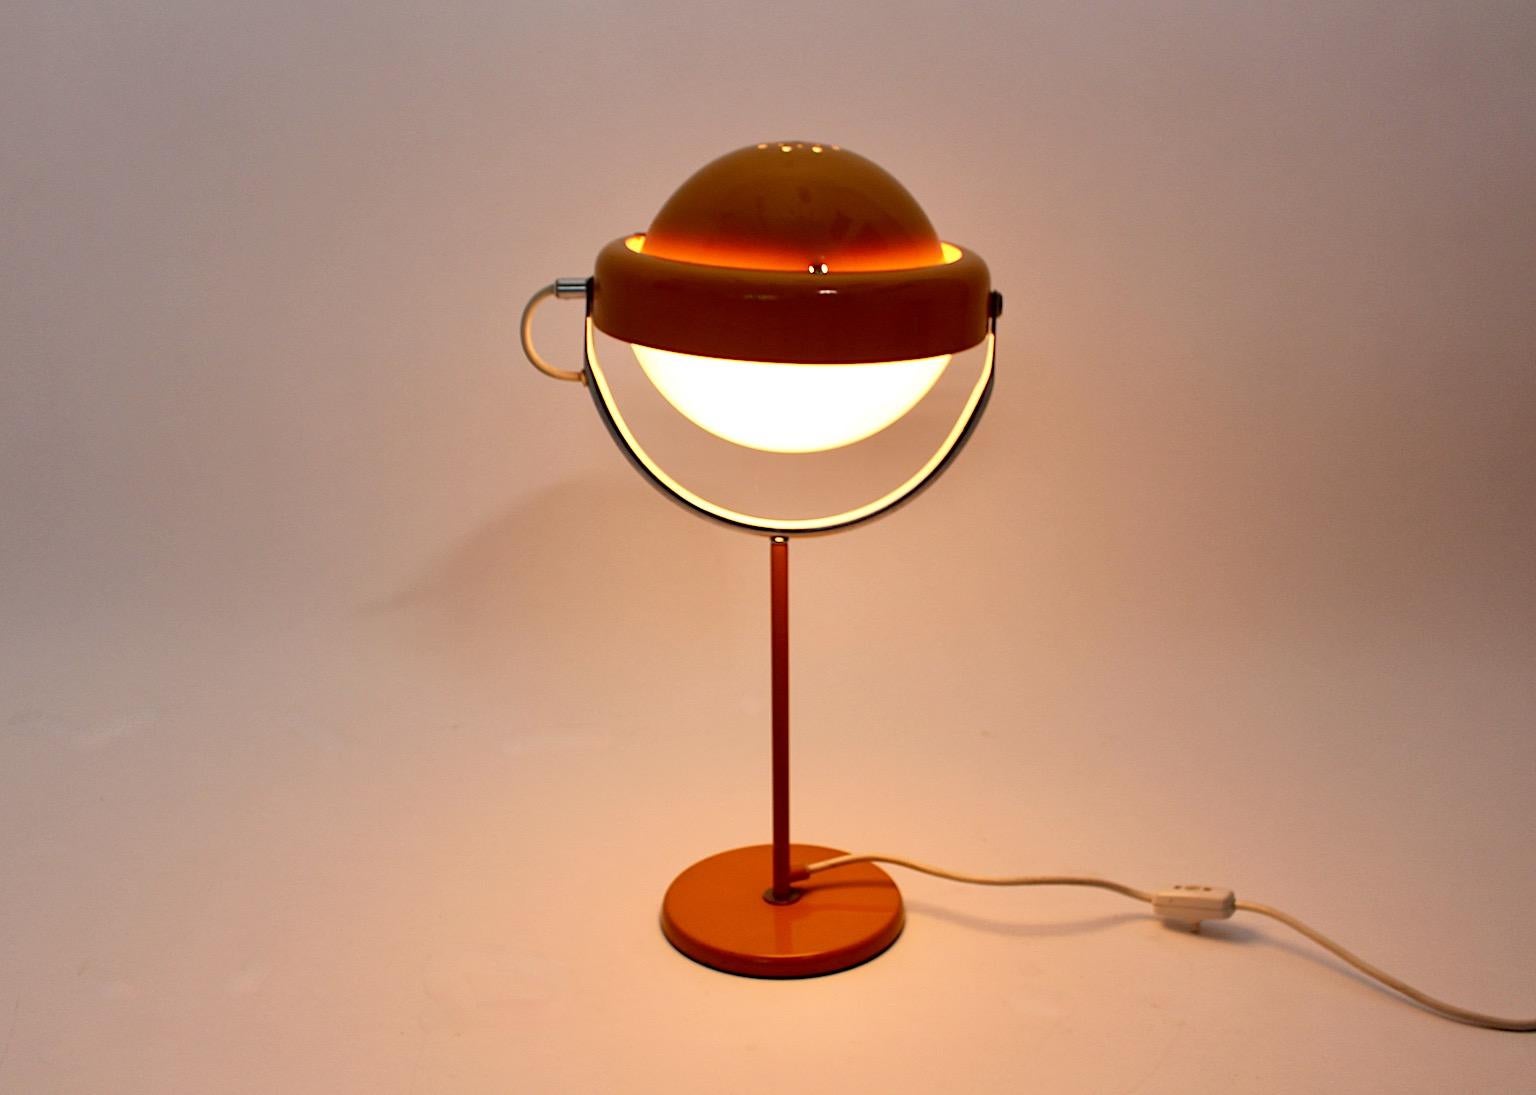 Space Age Vintage Yellow or Orange Table Lamp Uno Dahlen, 1960s, Sweden For Sale 4